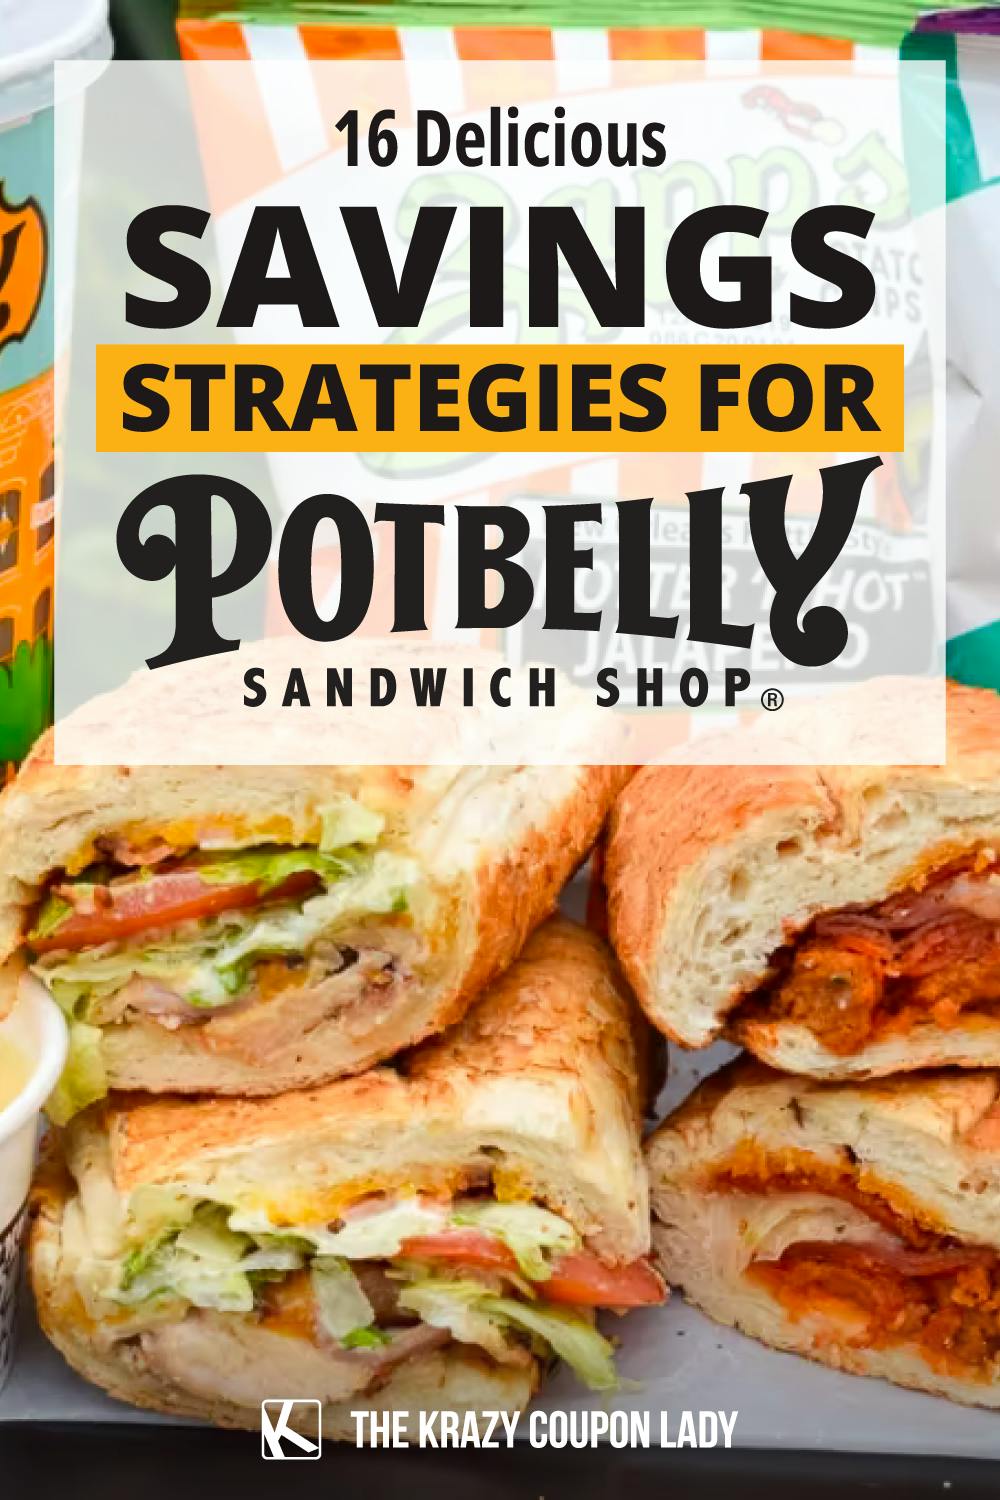 16 Mouth-Watering Savings Strategies for Potbelly Sandwich Shop